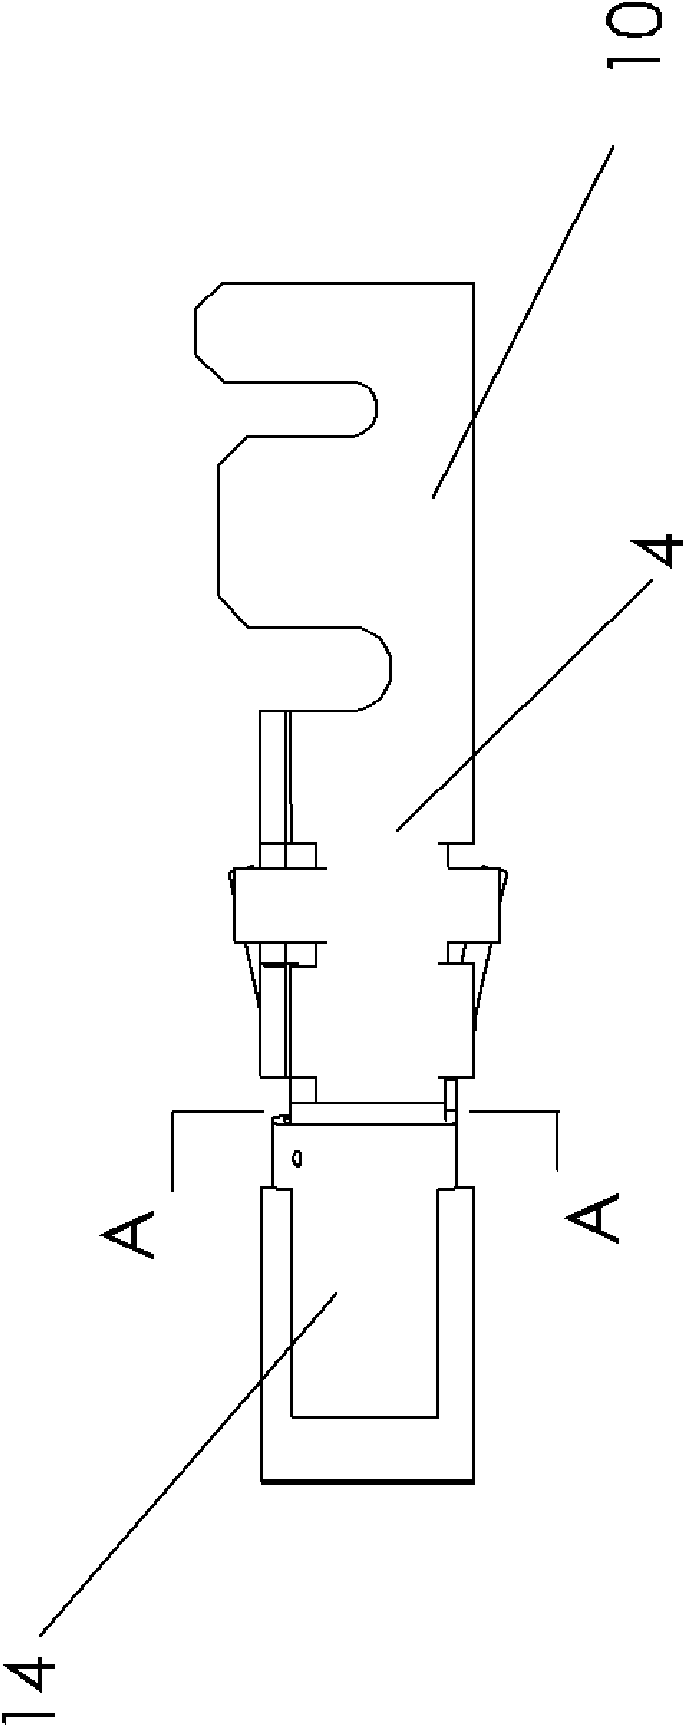 Chip-type contact of electric connector for terminating cable